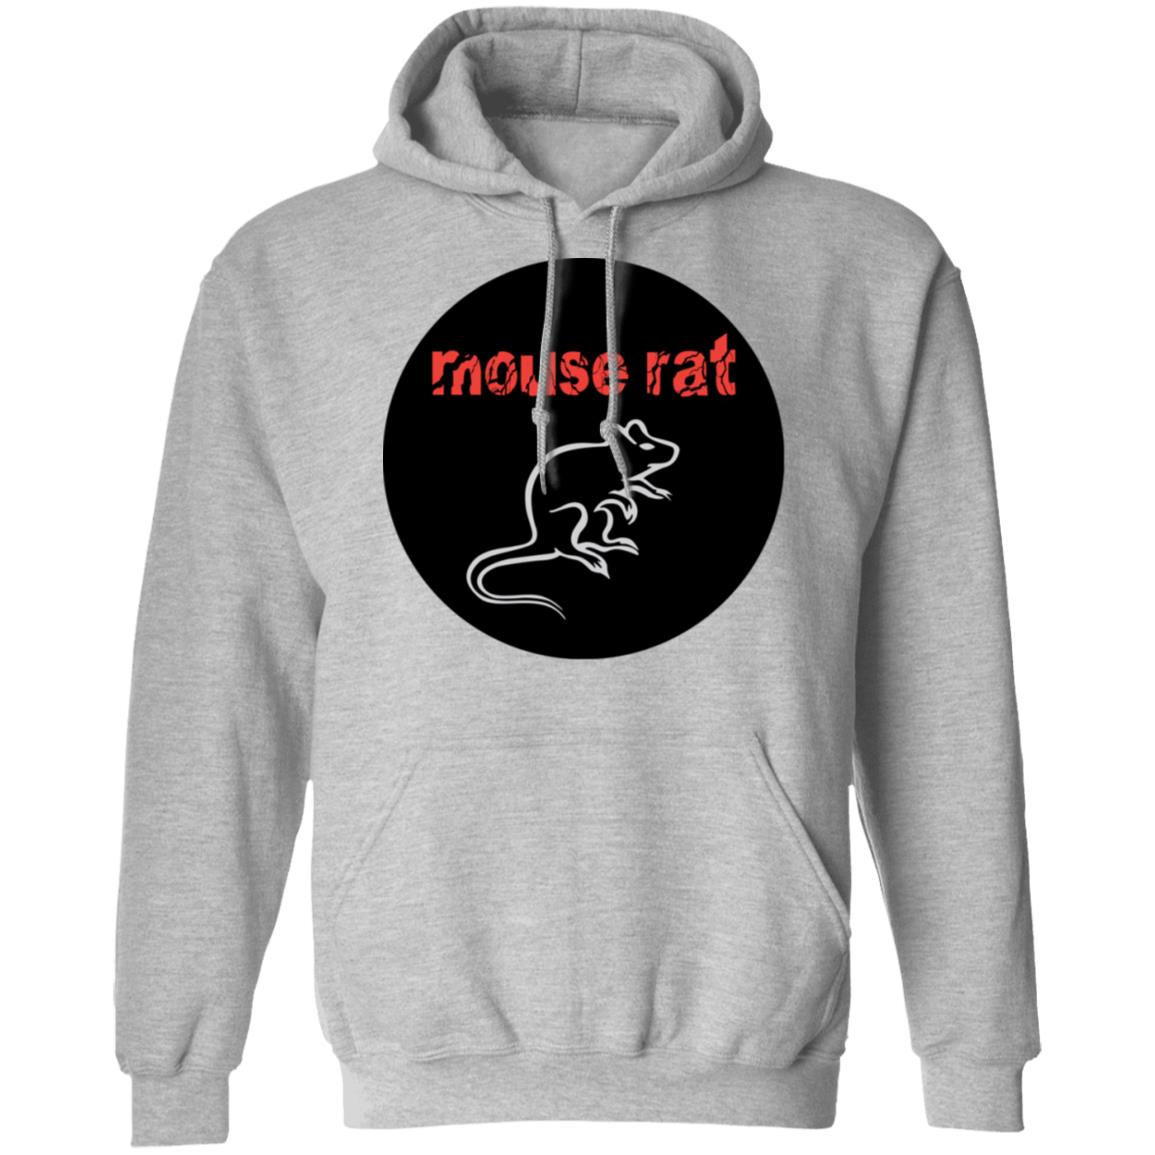 Parks and Recreation Mouse Rat Shirt, Hoodie, Tank | Teemoonley.com